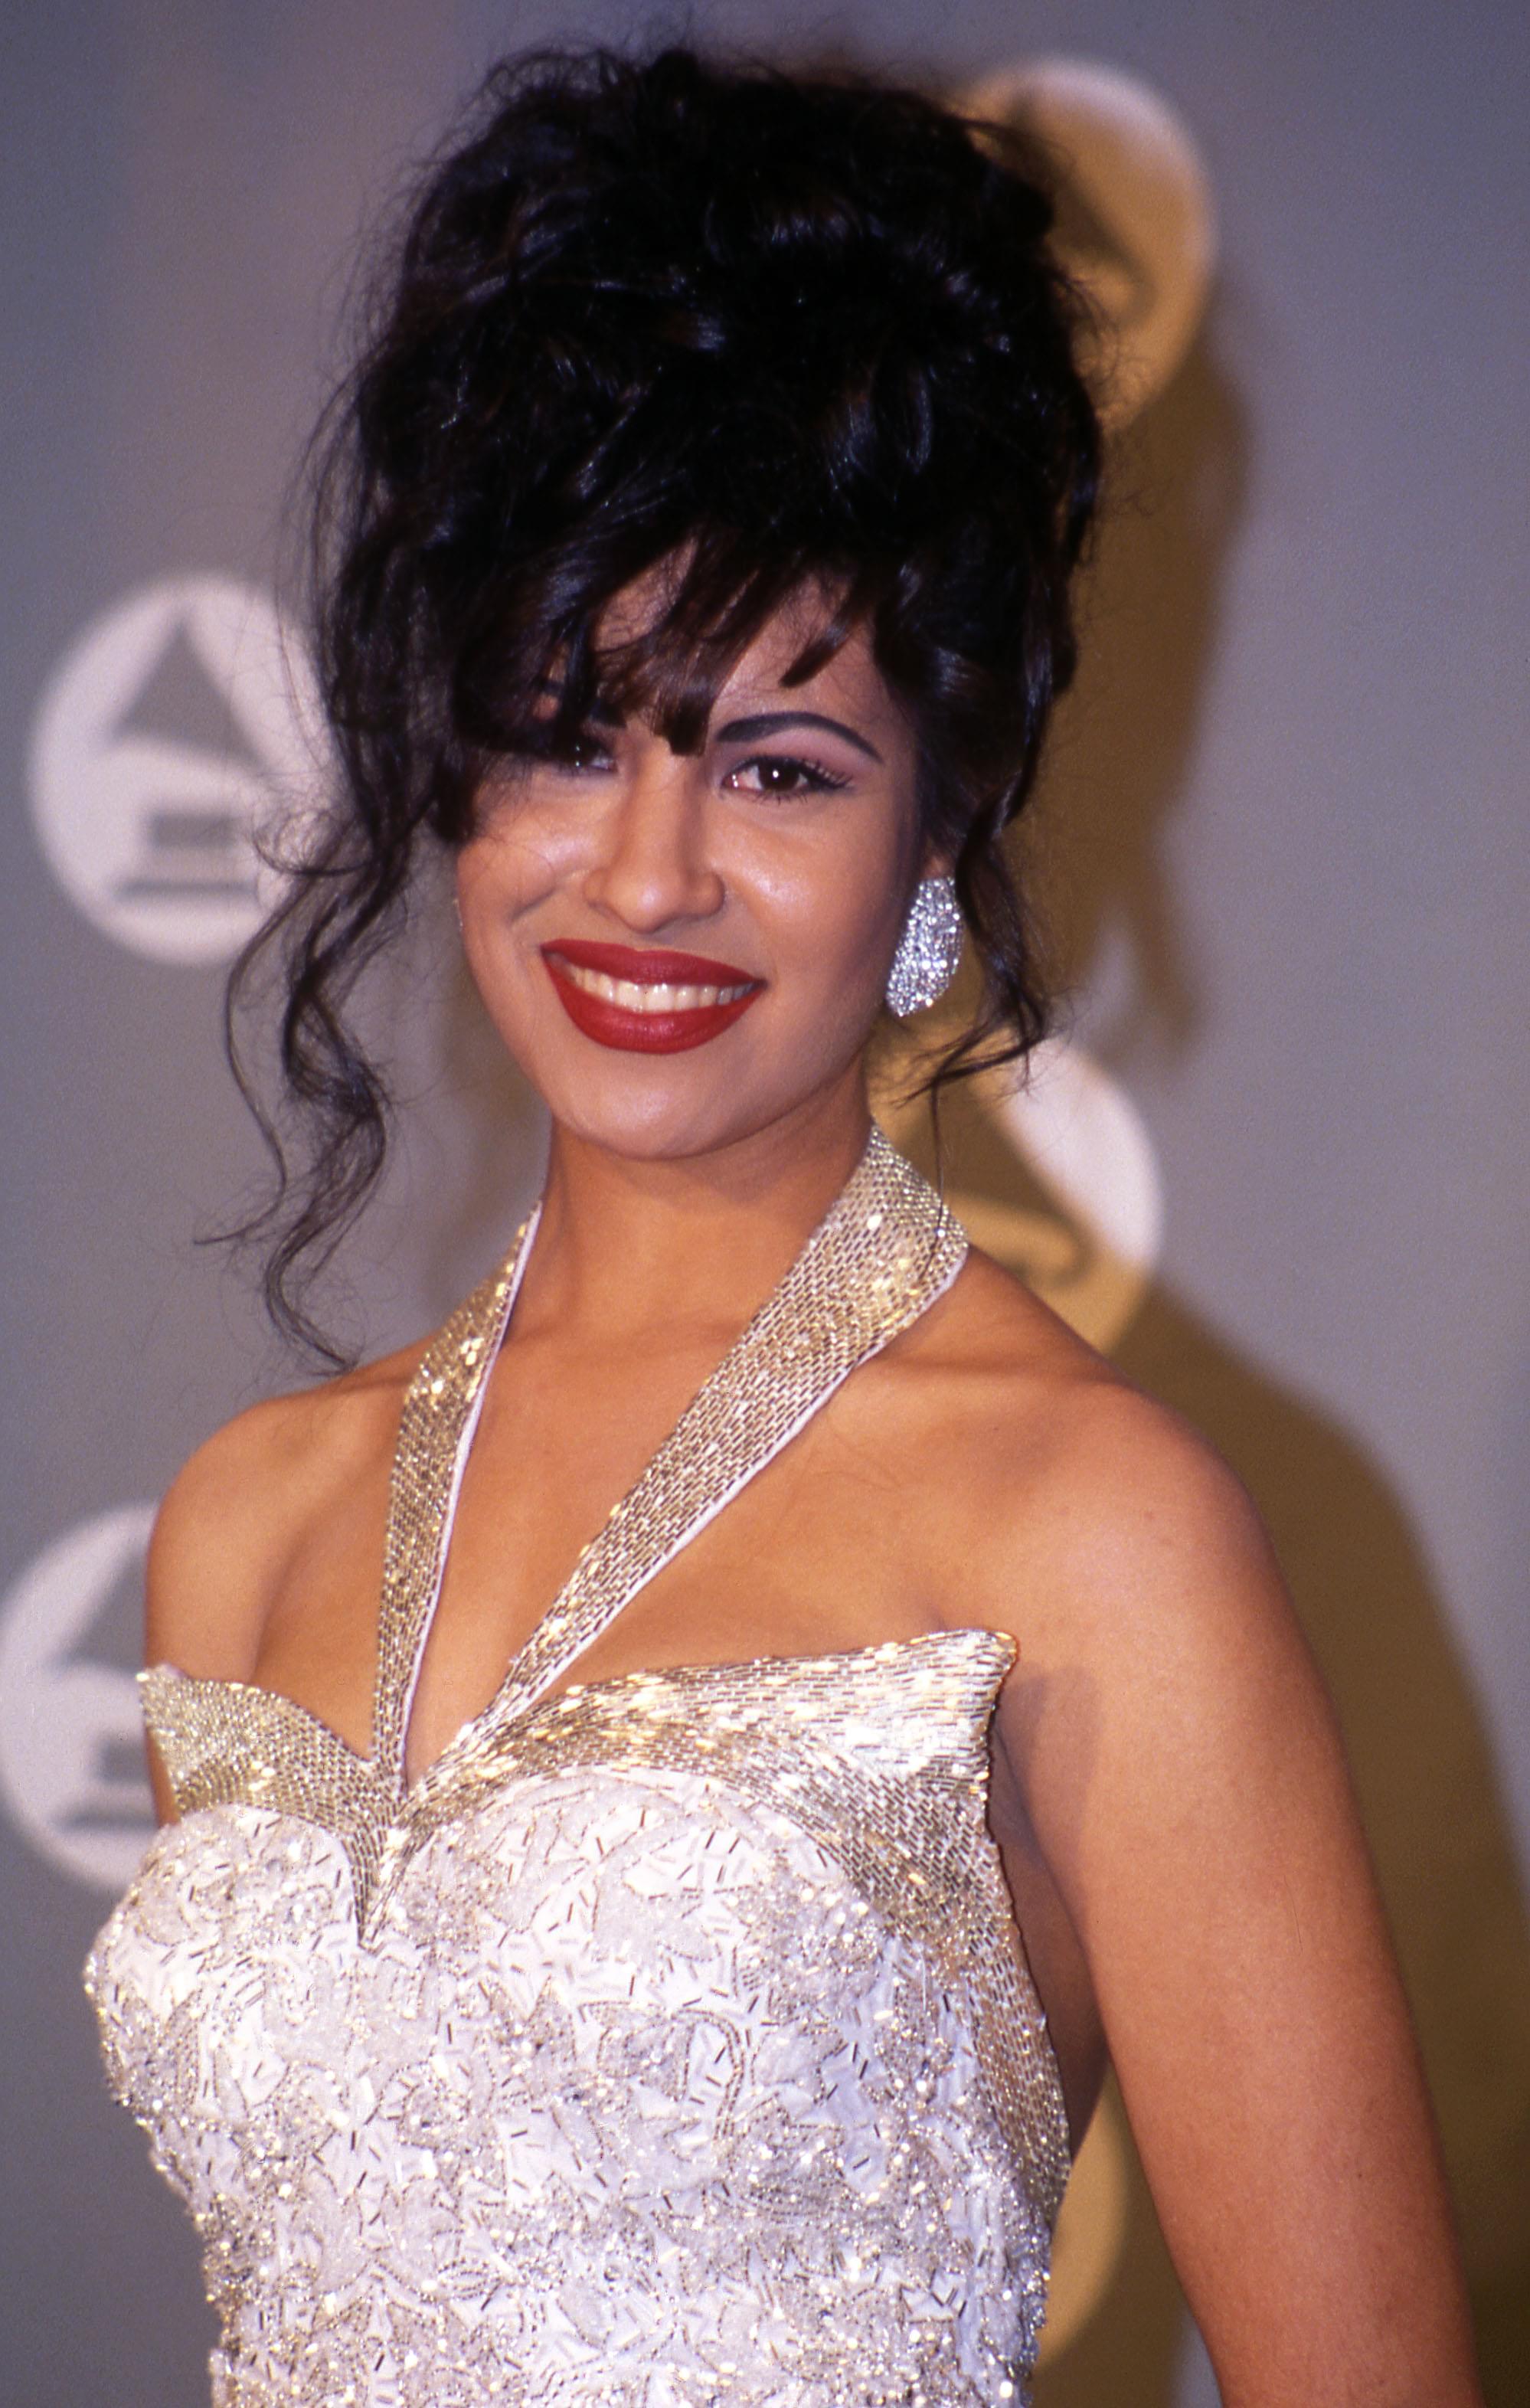 Celebrate Selena’s Star On The Hollywood Walk Of Fame By Listening To This Selena Hip Hop Mashup [LISTEN]